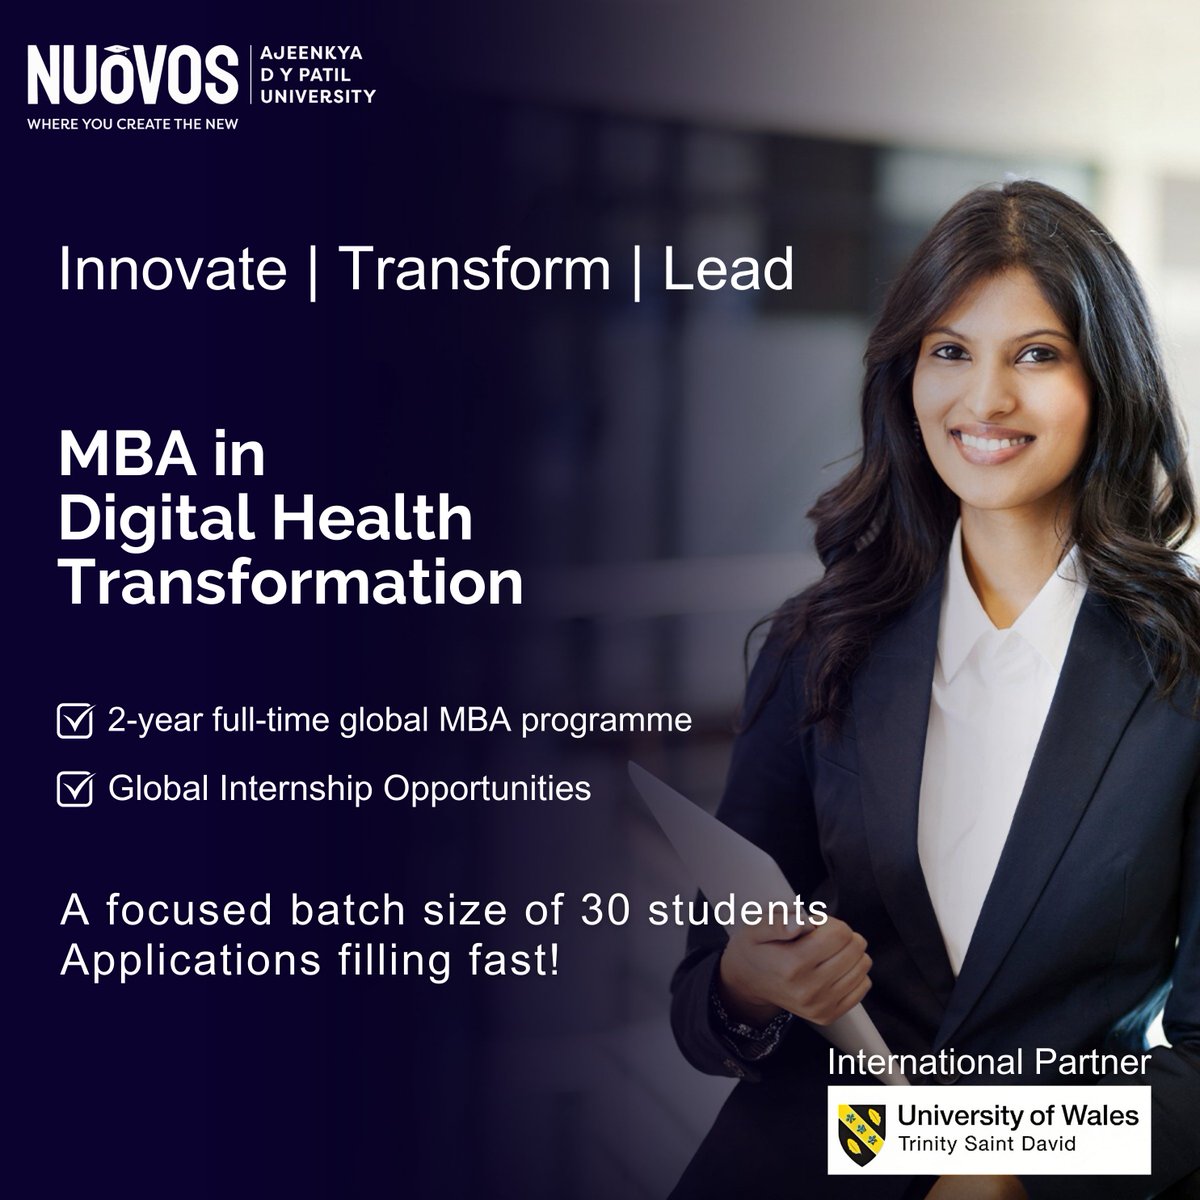 Ajeenkya DY Patil University, Pune, is thrilled to announce the launch of the brand-new MBA in Digital Health Transformation program.
adypunuovos.com/programs/mba-d…
#ADYPU #UWTSD #MBA #DigitalHealthTransformation